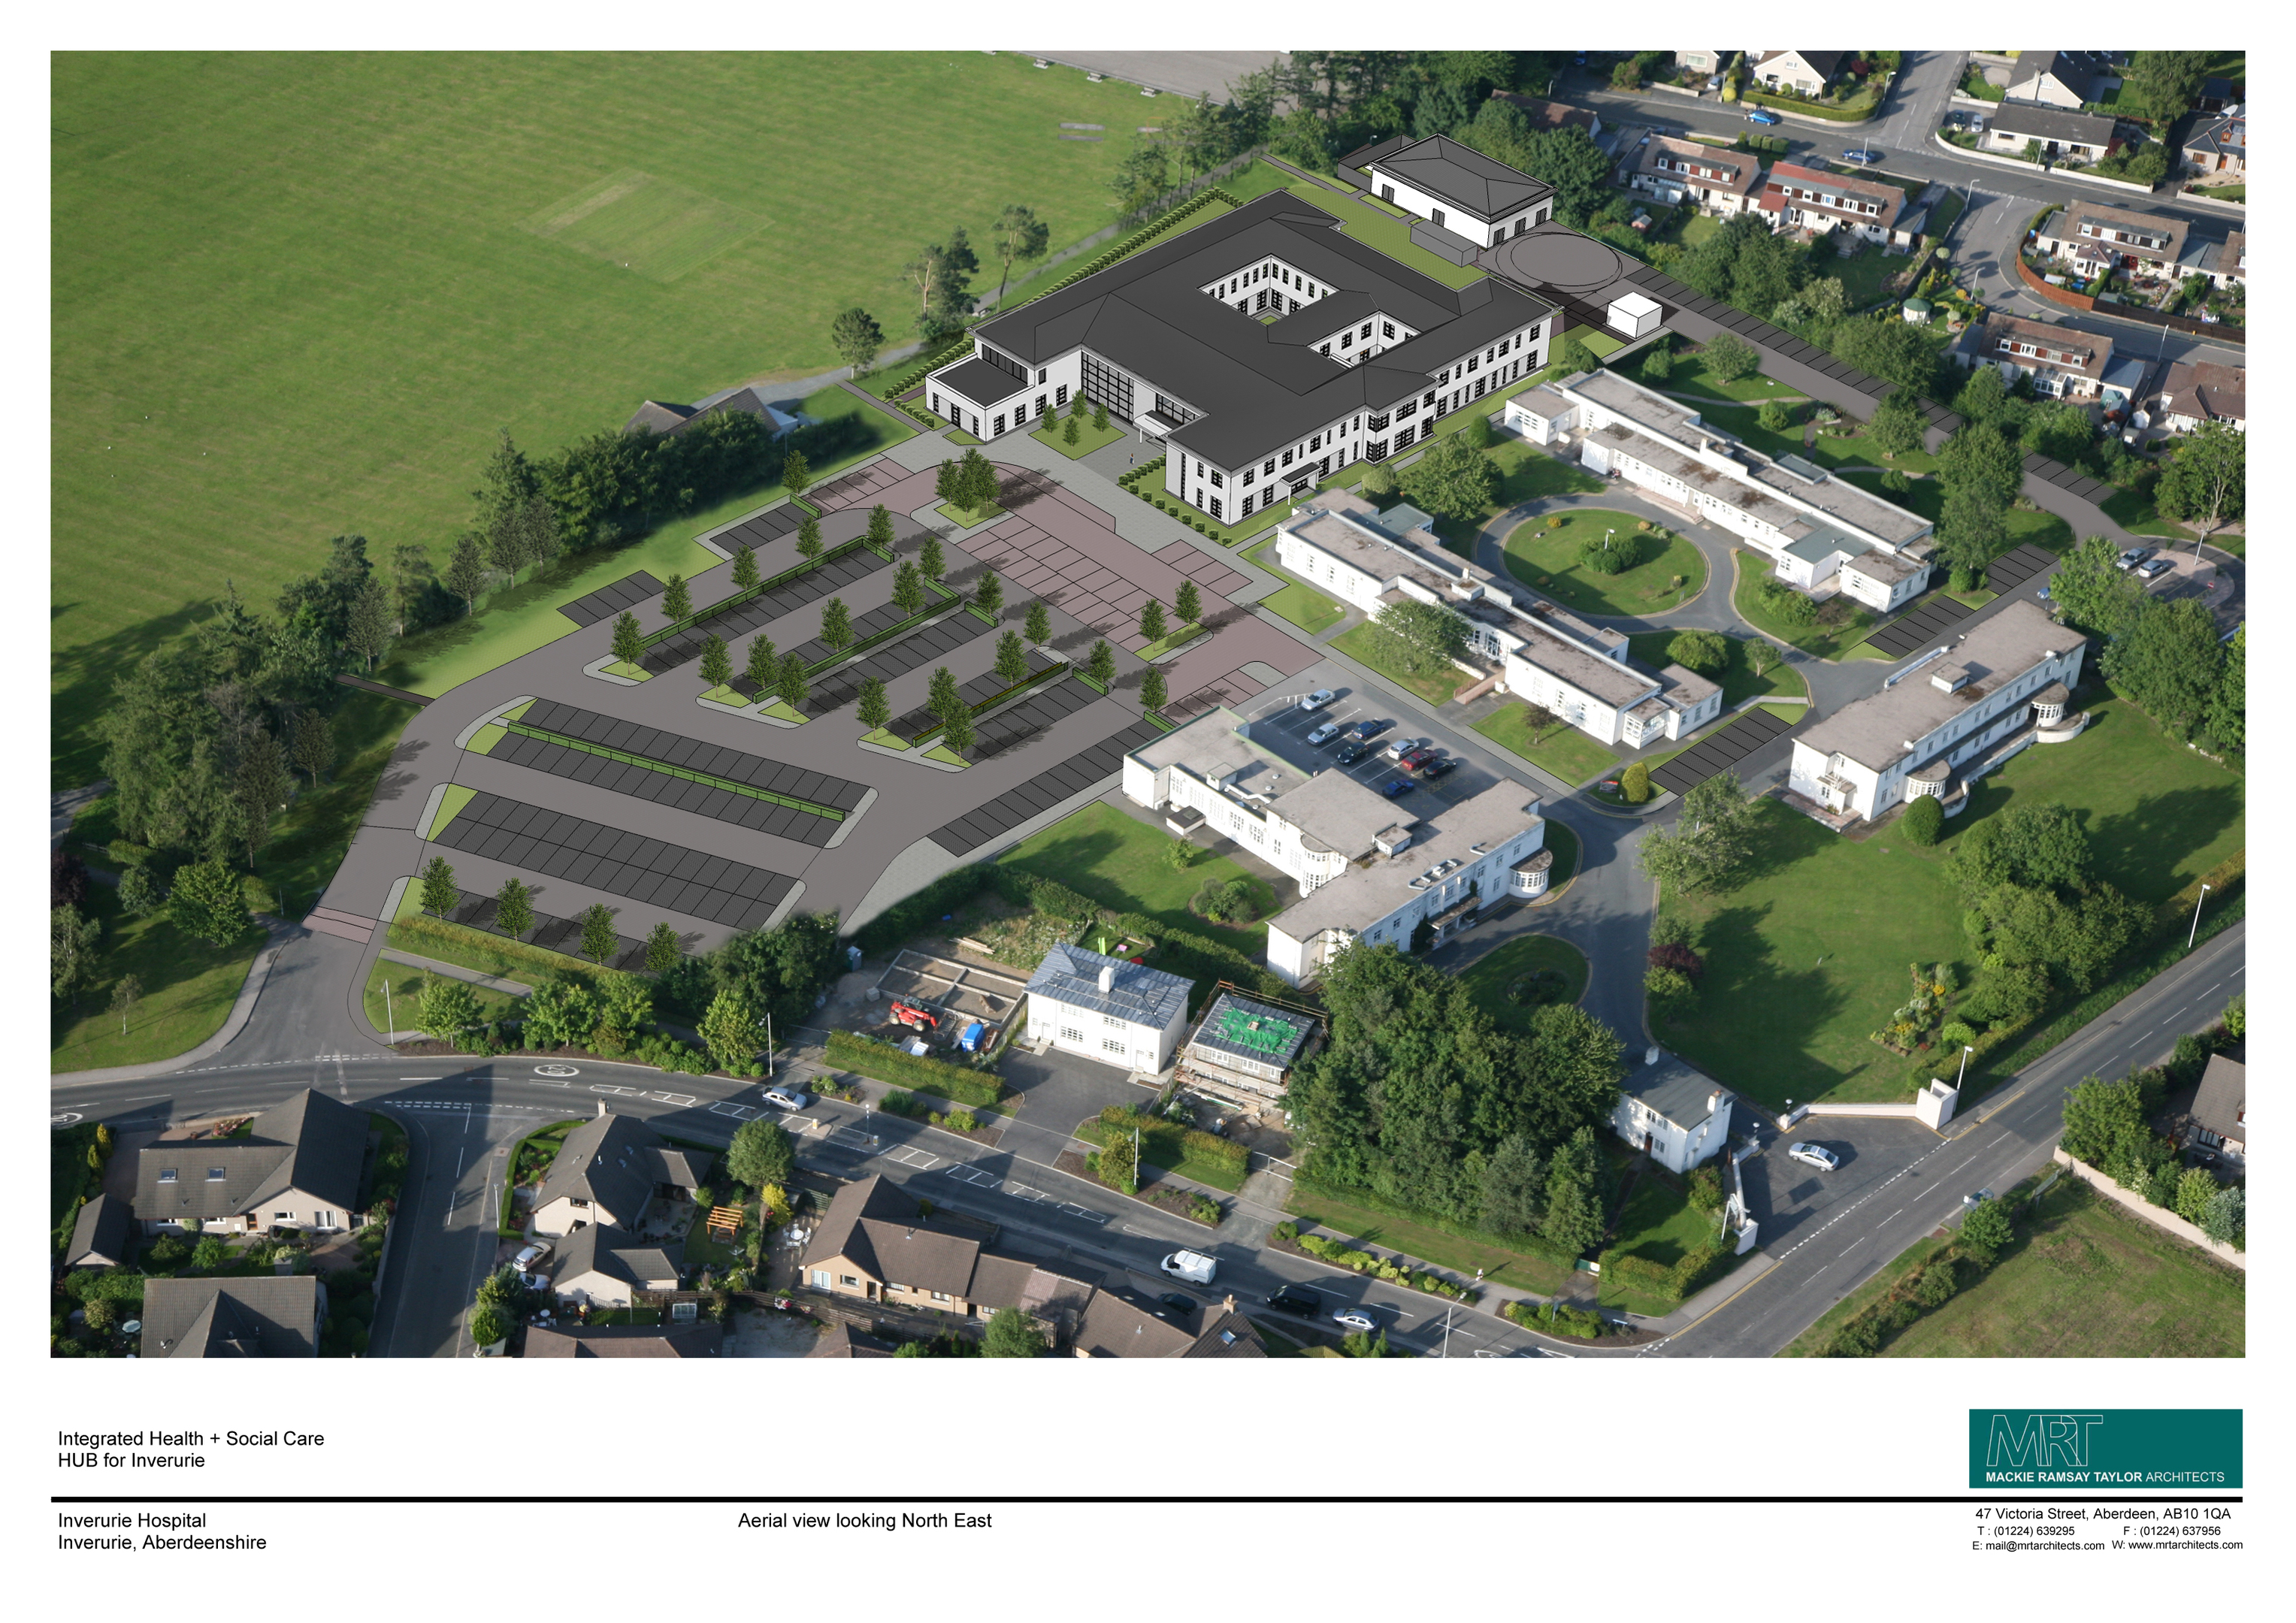 How the Inverurie Hospital site would look as the Inverurie Health Centre